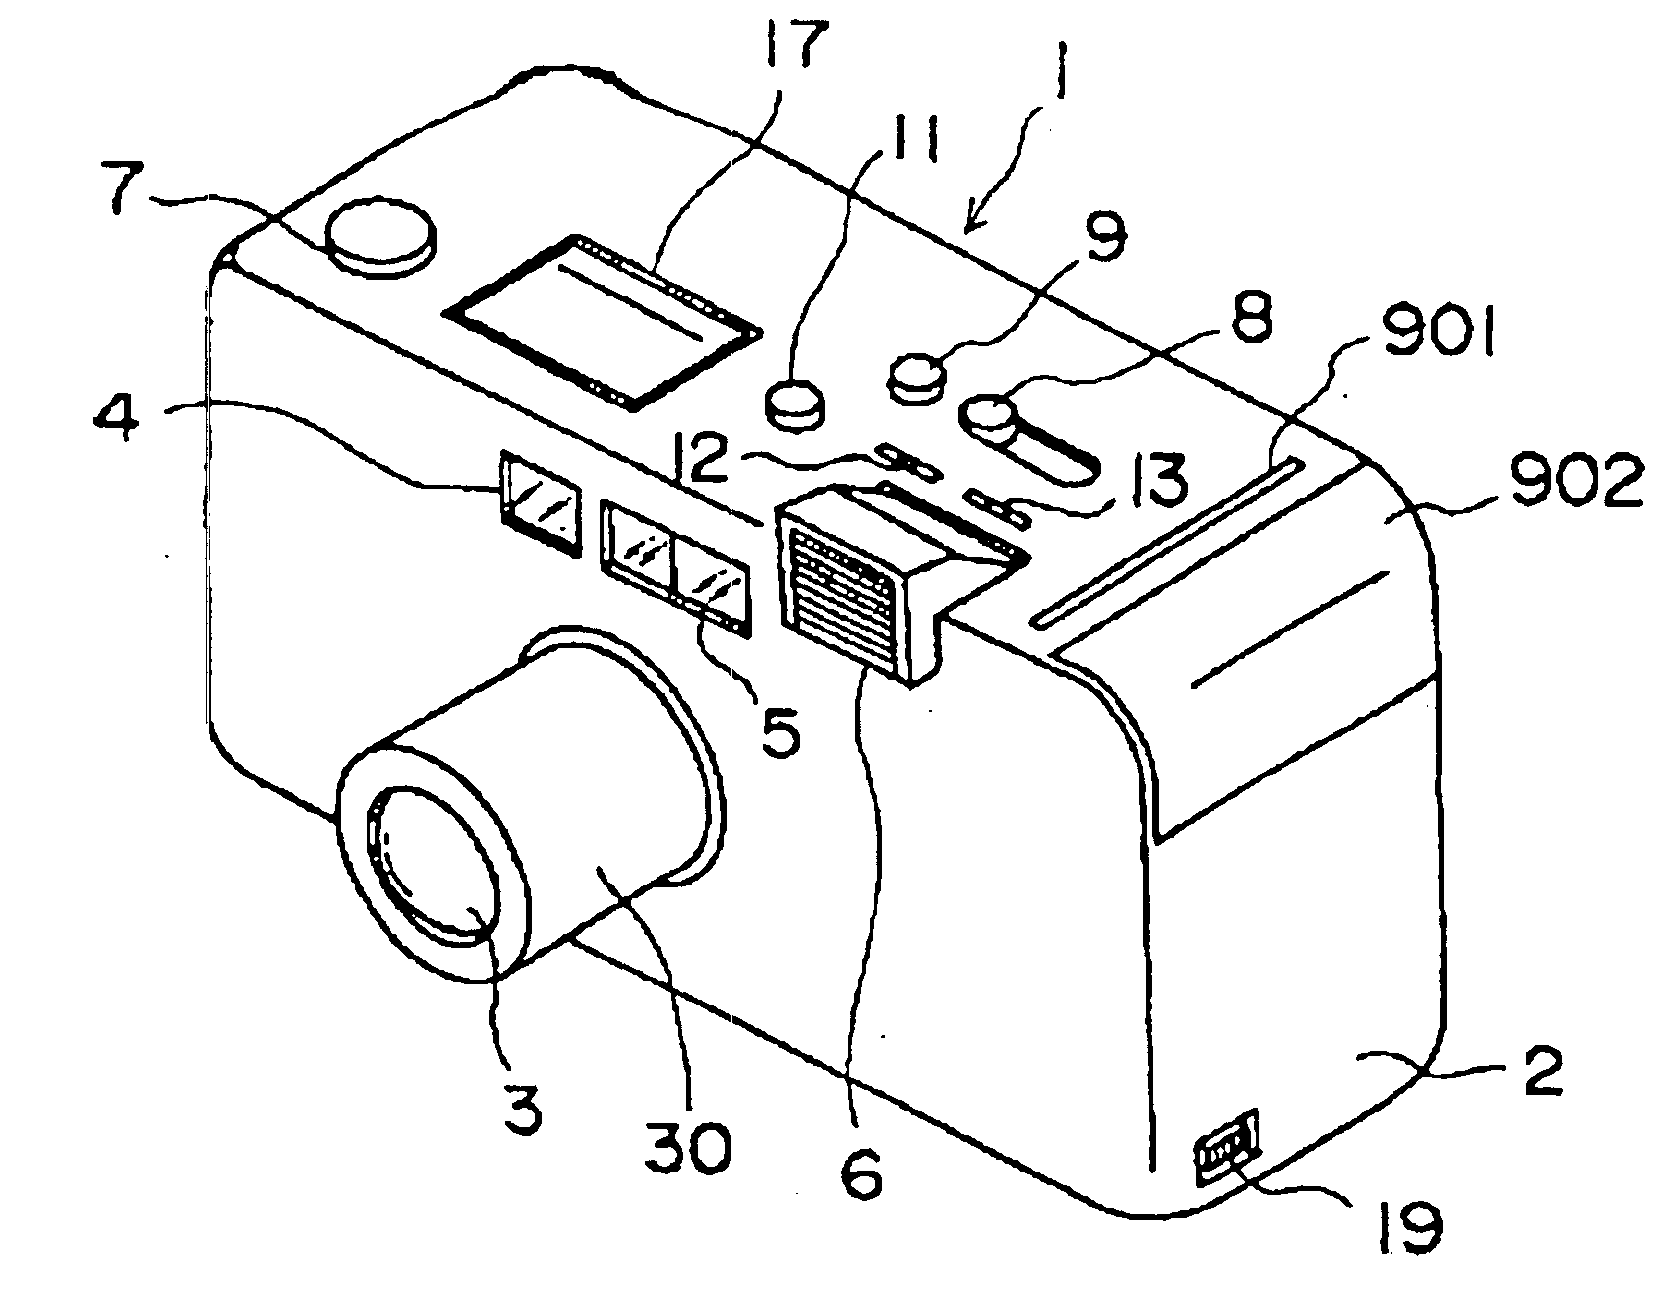 Digital camera having a printing function in which a movable camera part is moved from an in-use position to an out-of-use position during printing